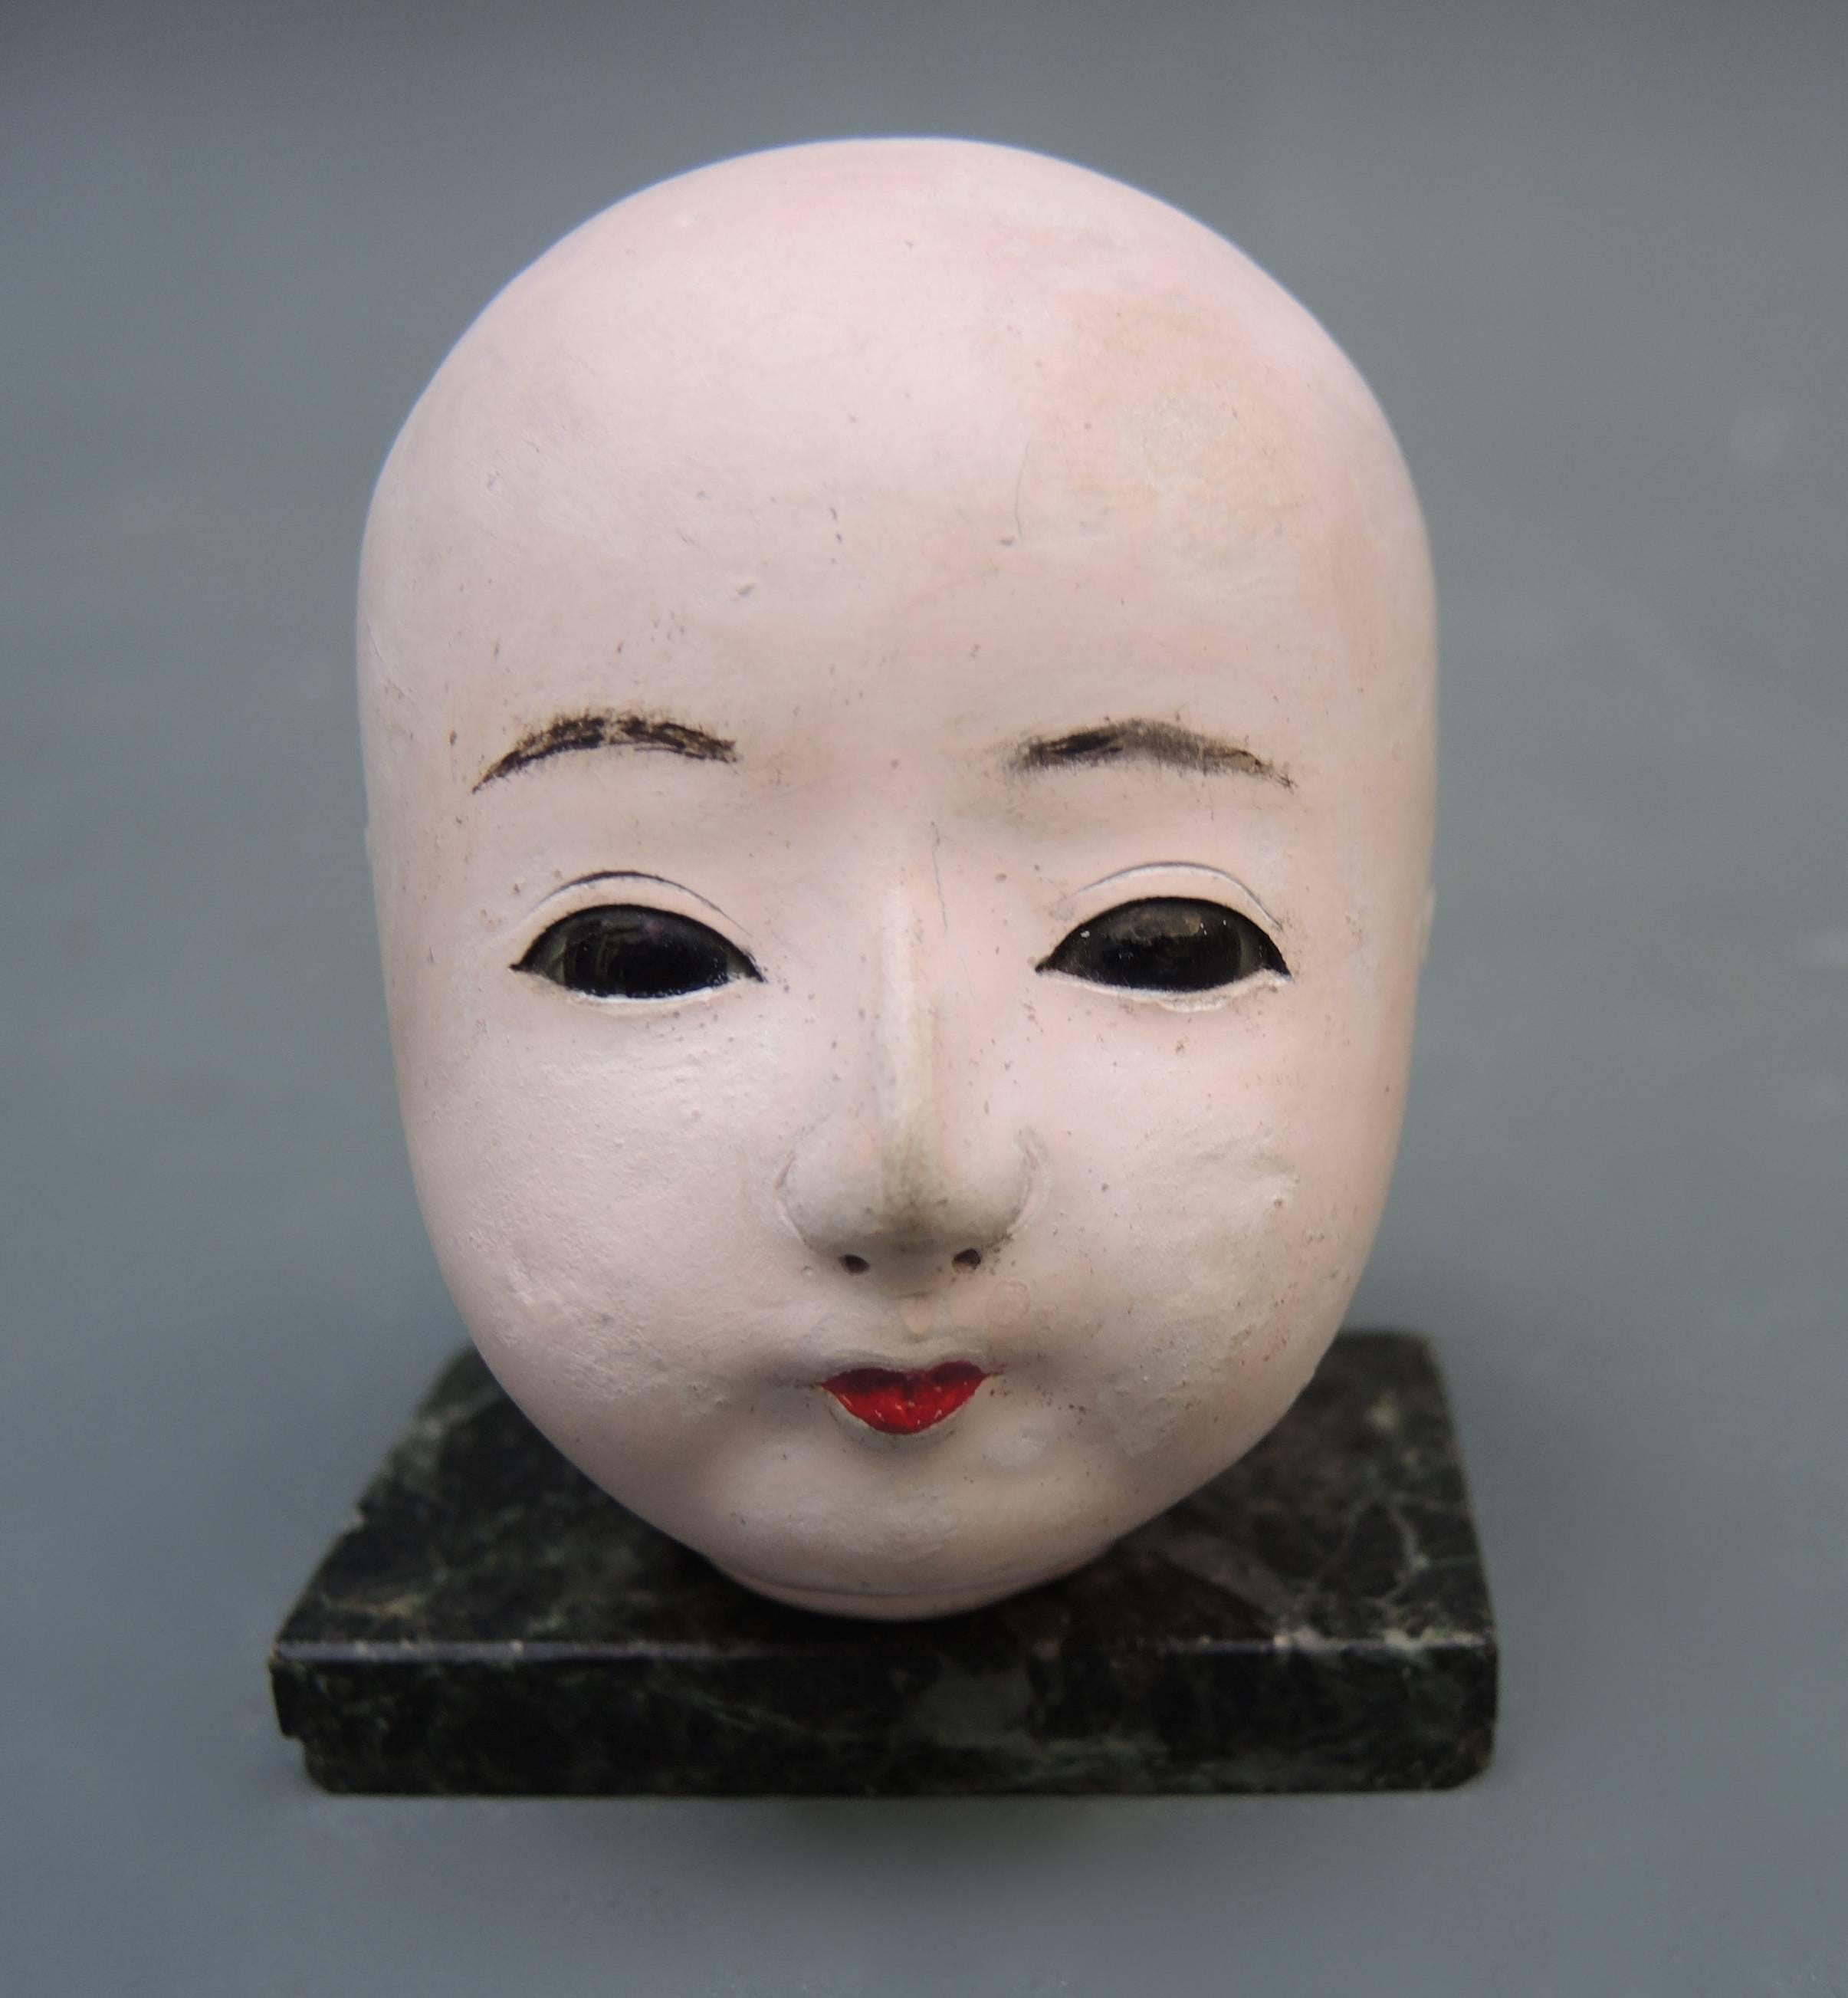 A very elegant Japanese papier mâché and oyster paste Ichimatsu doll head. The eyes are black reverse painted glass and the head is hand-sculpted in papier mâché, coated in a paste made from crushed oyster shells and then delicately hand-painted.